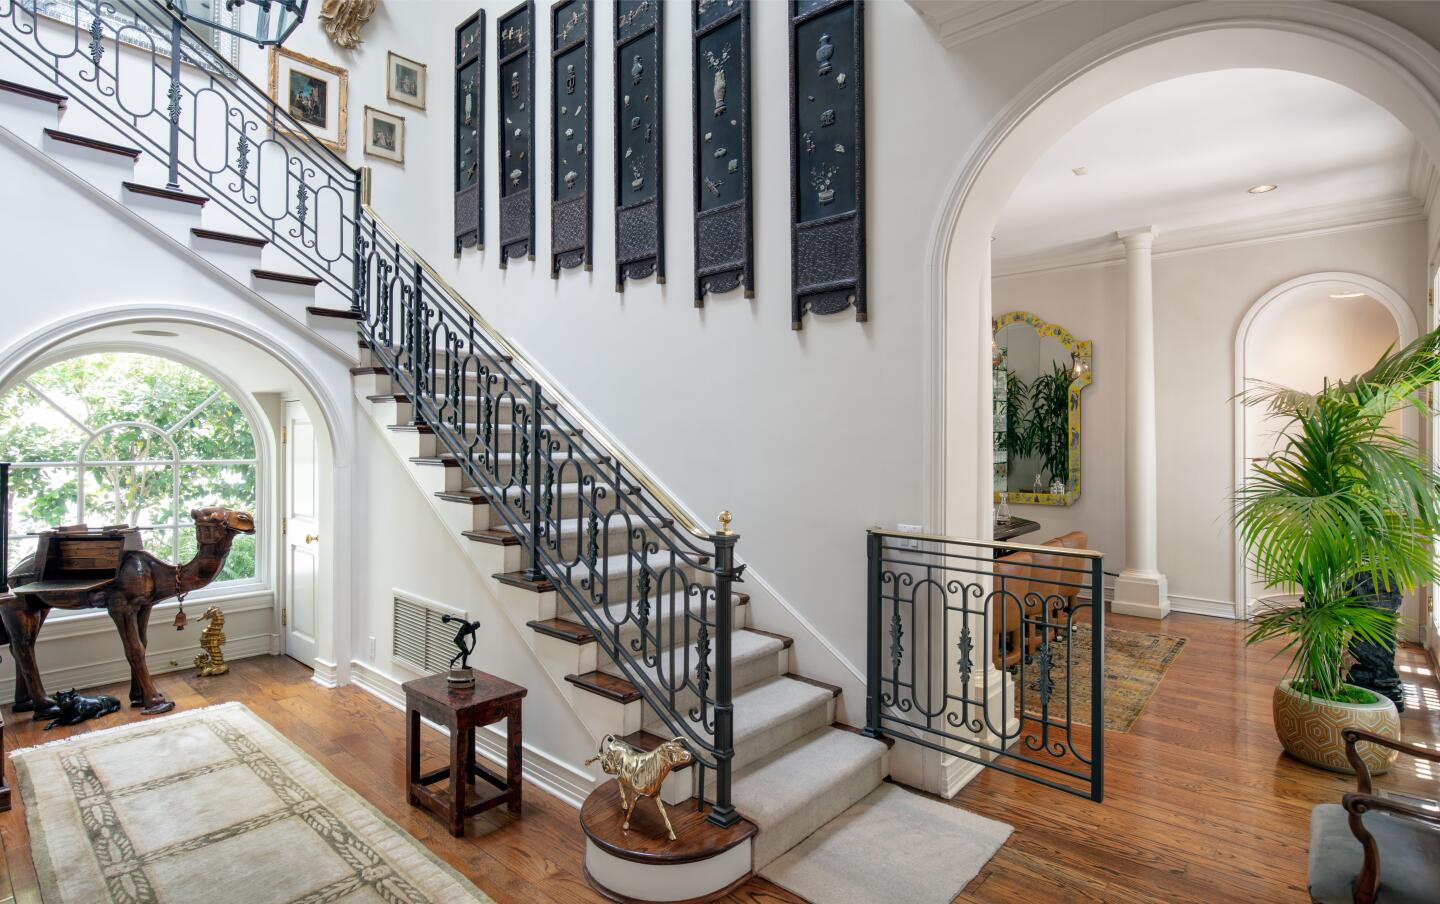 The two-story foyer.